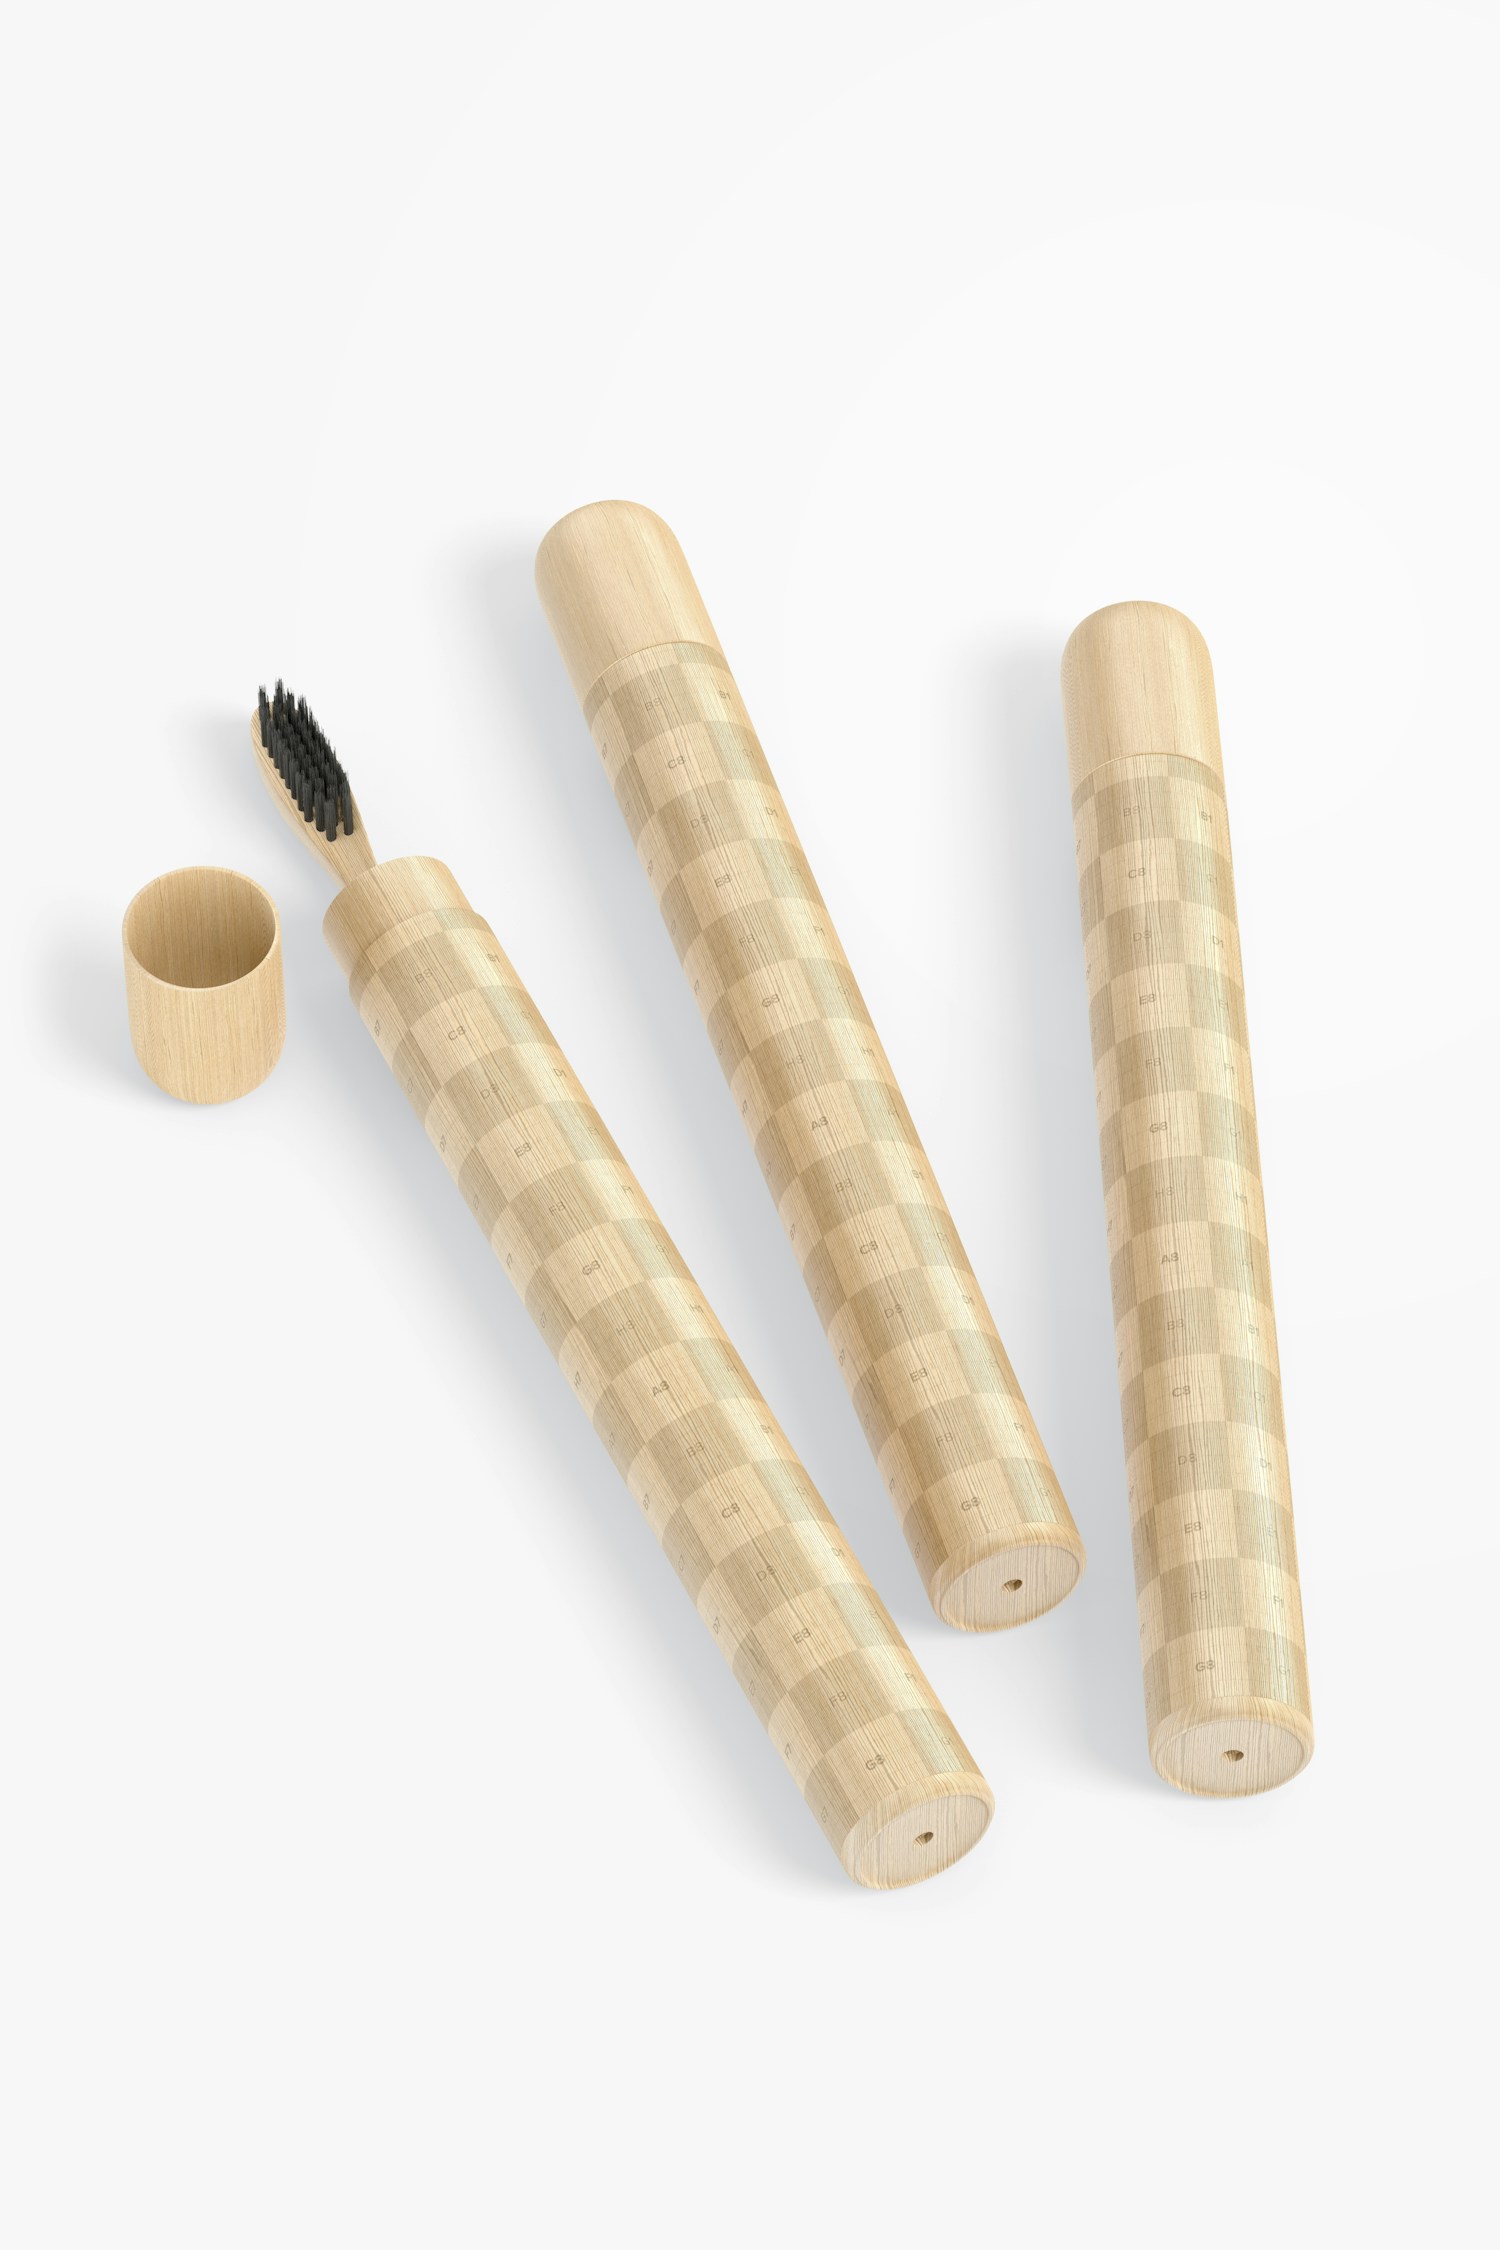 Toothbrush Cases Mockup, Perspective View 02